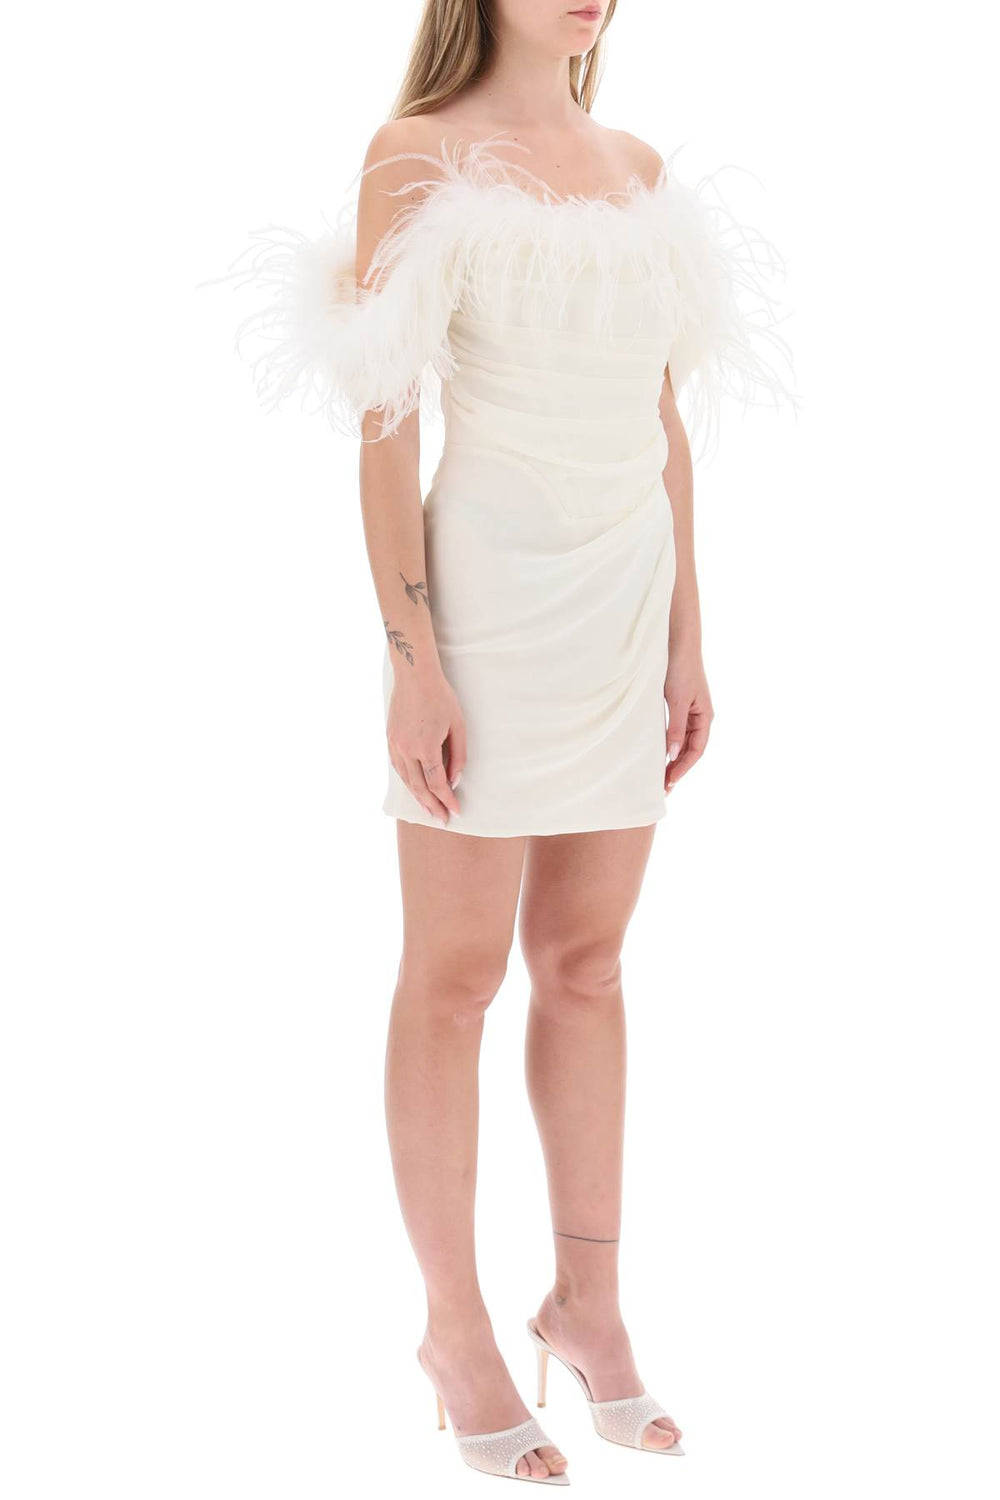 Giuseppe di morabito mini dress in poly georgette with feathers-1